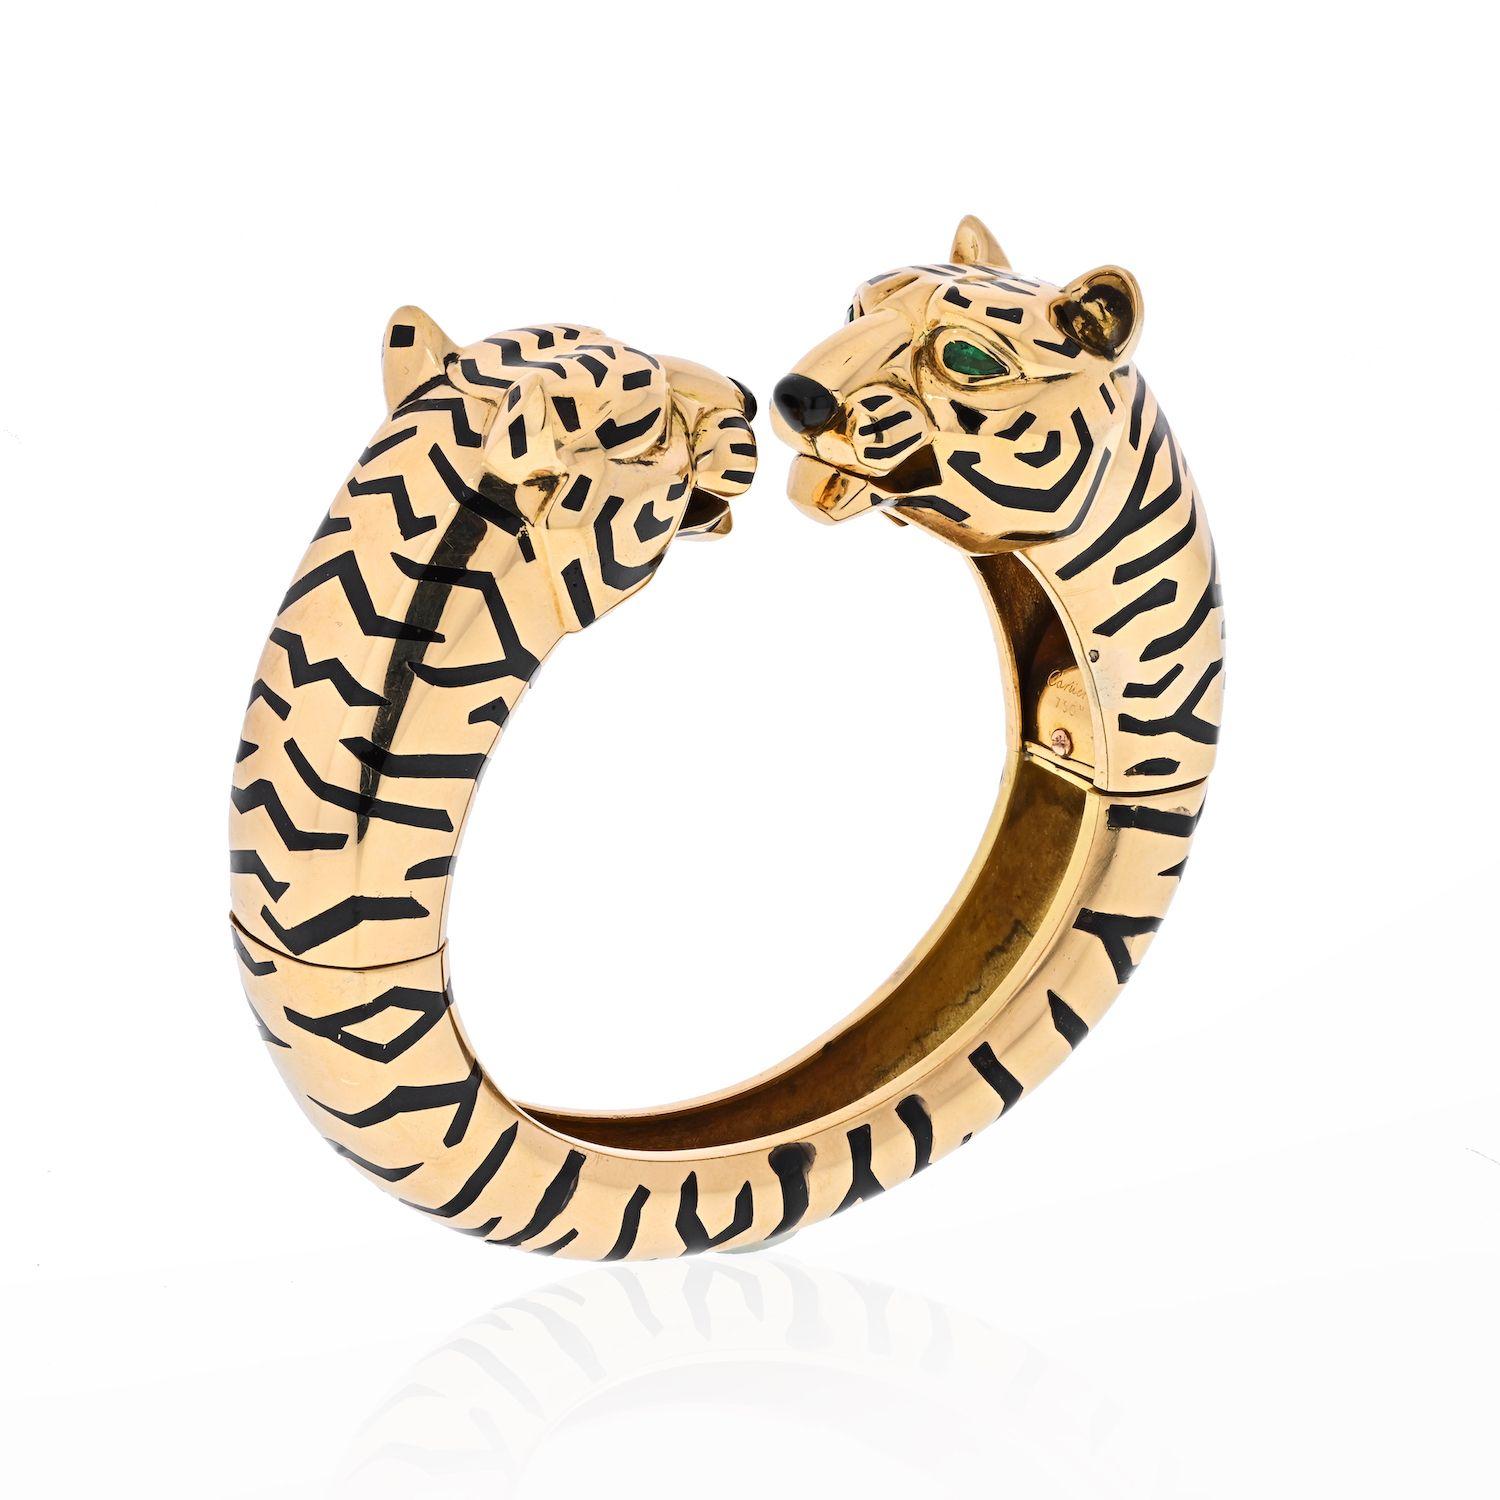 Cartier's famous panther bracelet is a must-have for jewelery. 
As early as the year 1918, Jeanne Toussaint, creator at Cartier, made it the founding myth of the jeweler, it is inseparable from the 
Cartier House.
Here for sale the opposing panther